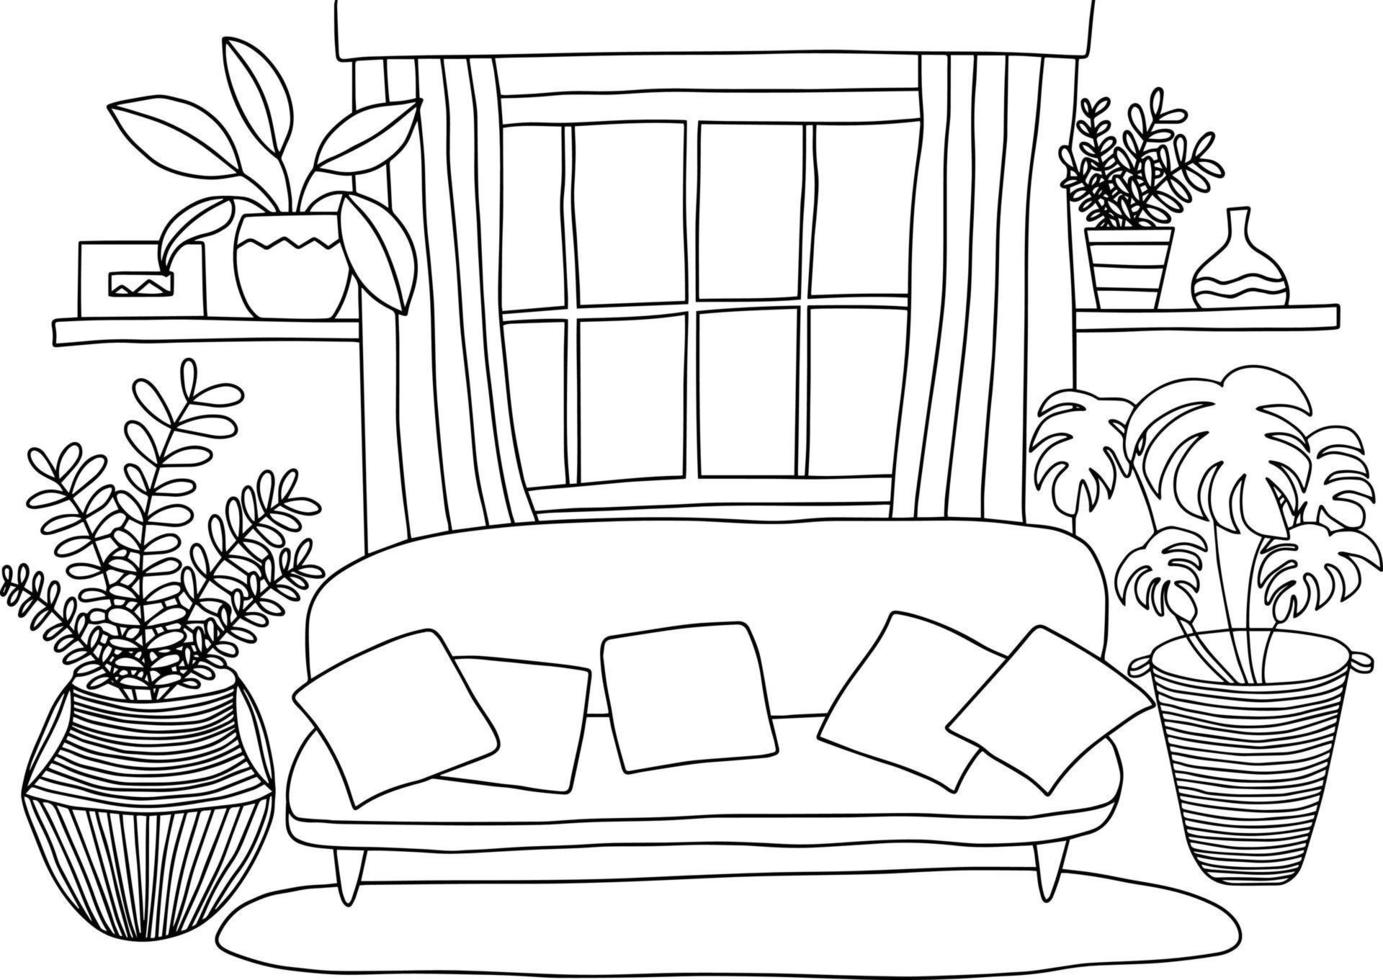 Cozy living room coloring page. Living room interior design. Cute coloring book for children and adults vector